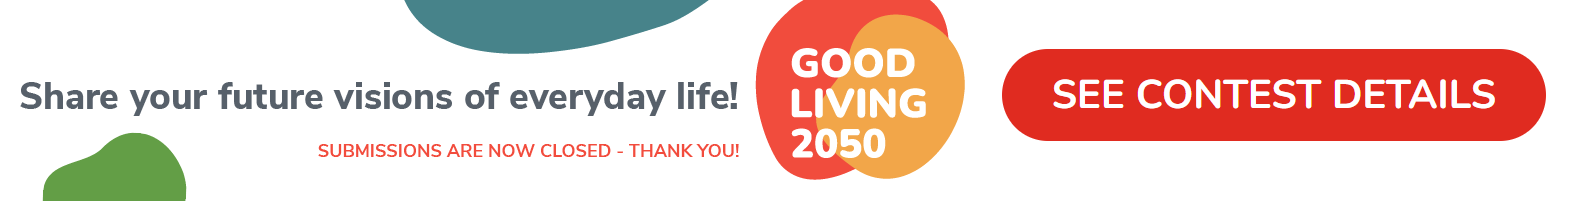 Good Living 2050. Share your future visions of everyday life! Submit by 15 feb 2023